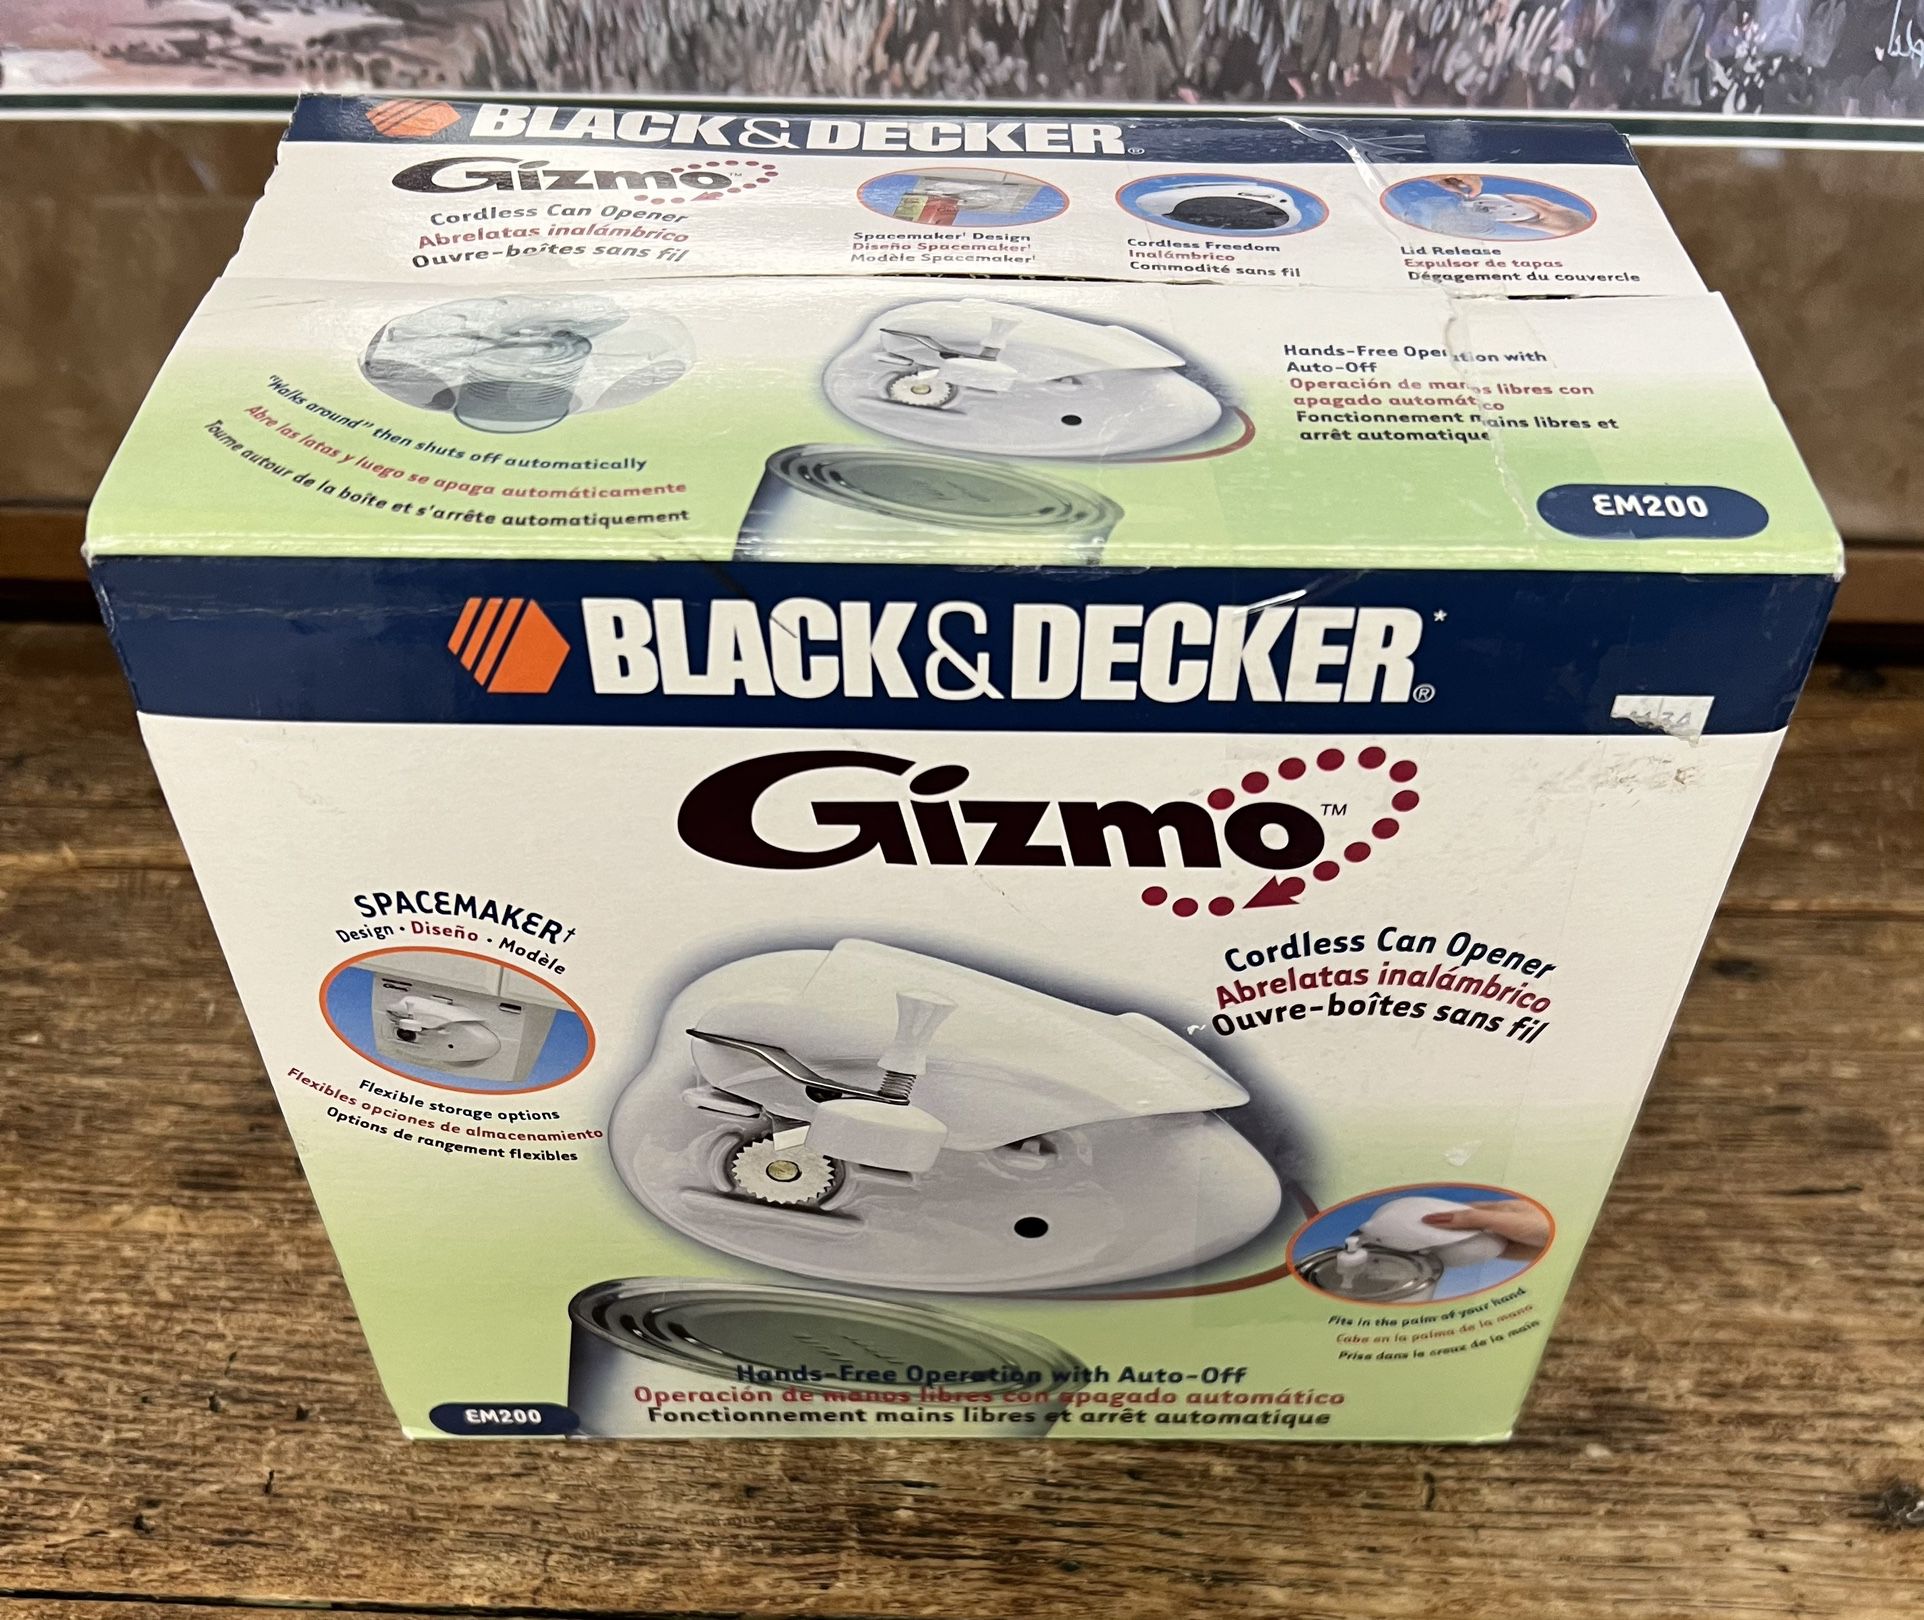 Gizmo Cordless Can Opener: Does It Work?